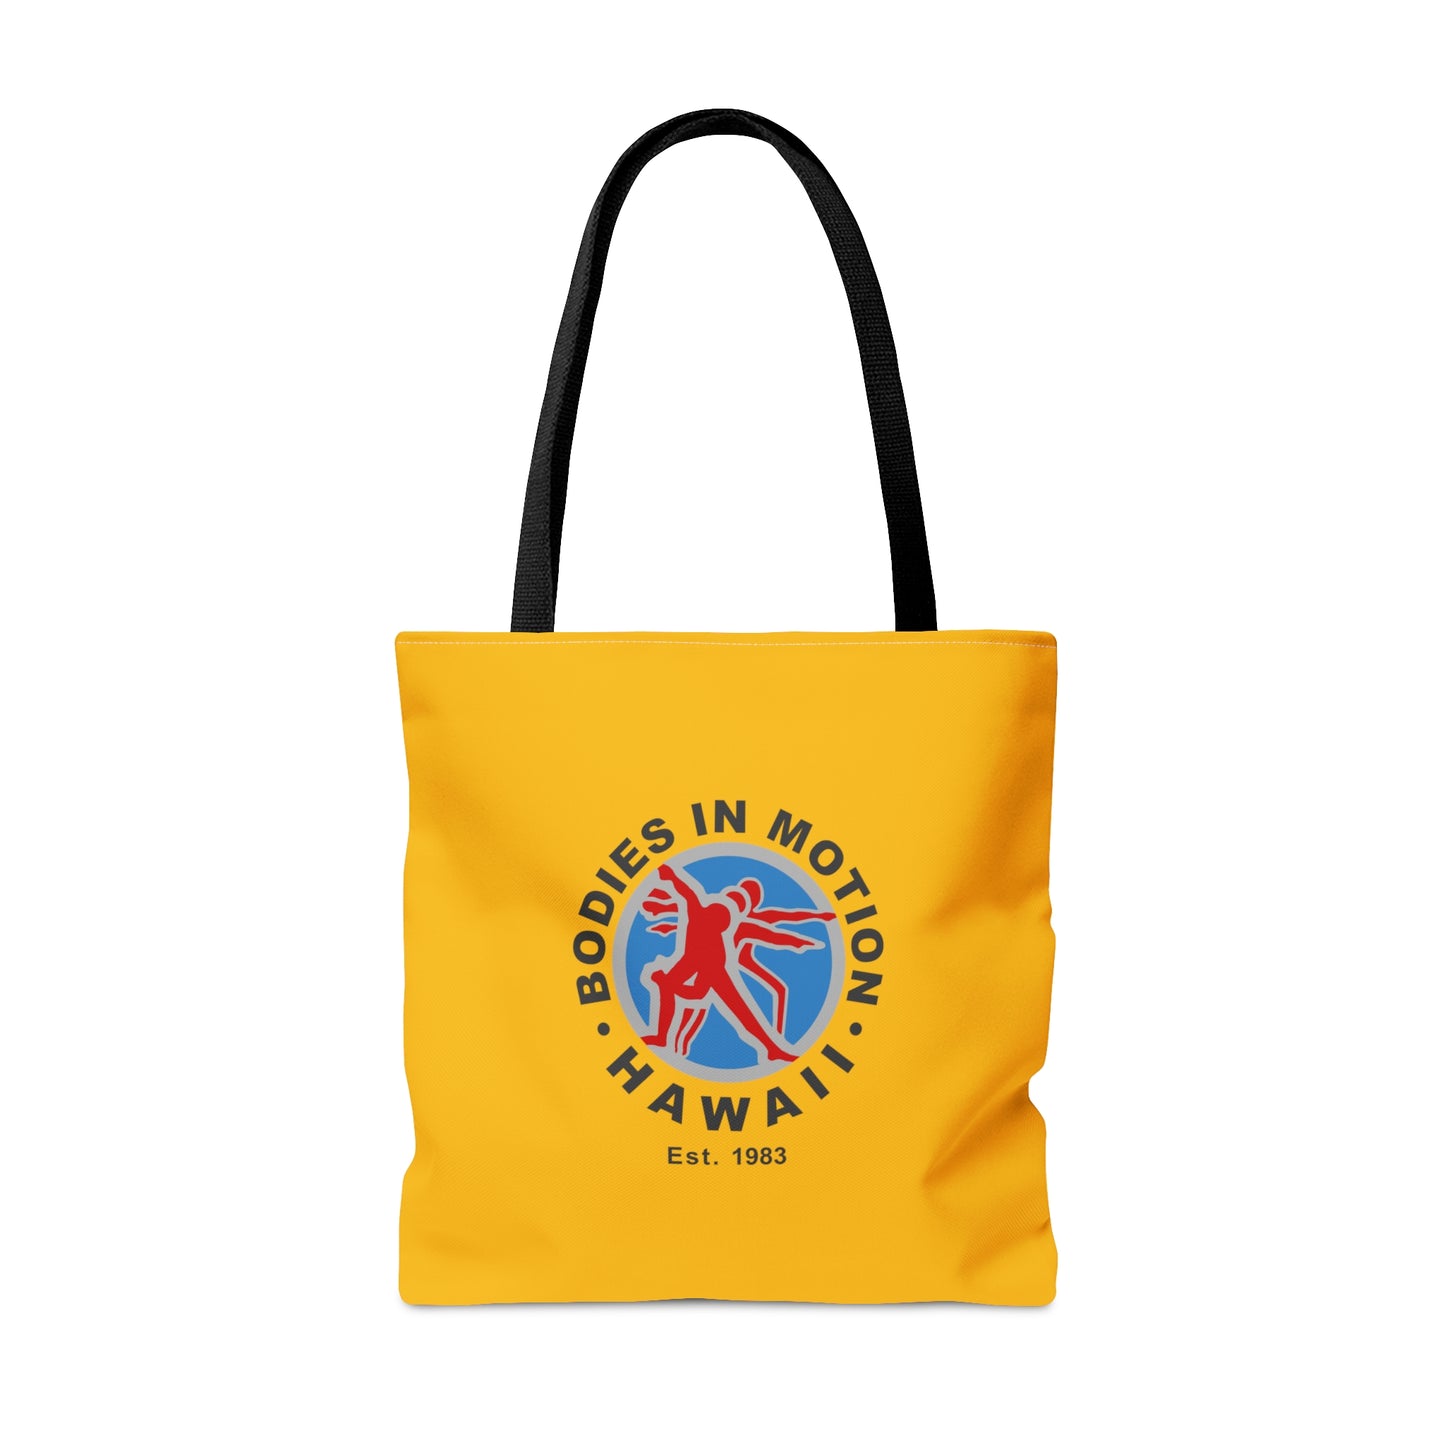 Bodies in Motion Tote Bag